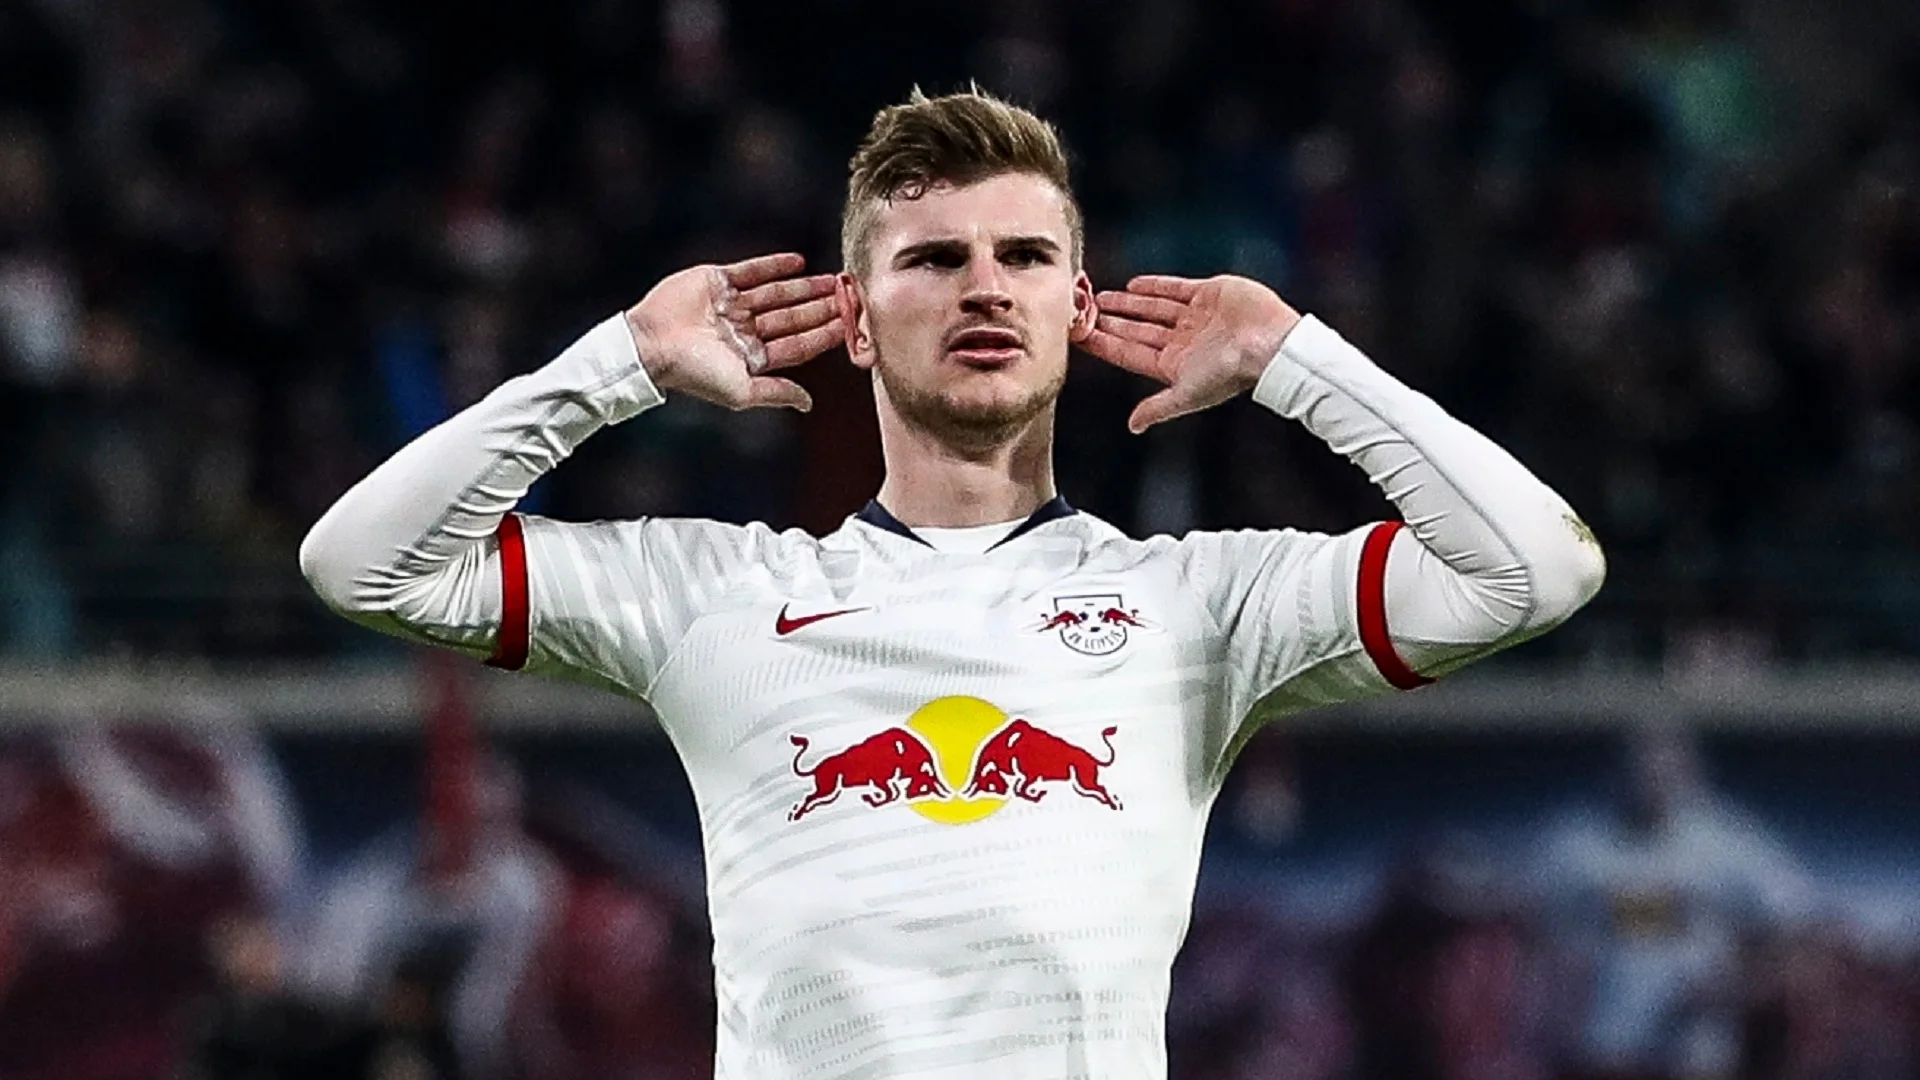 New image of player Timo Werner